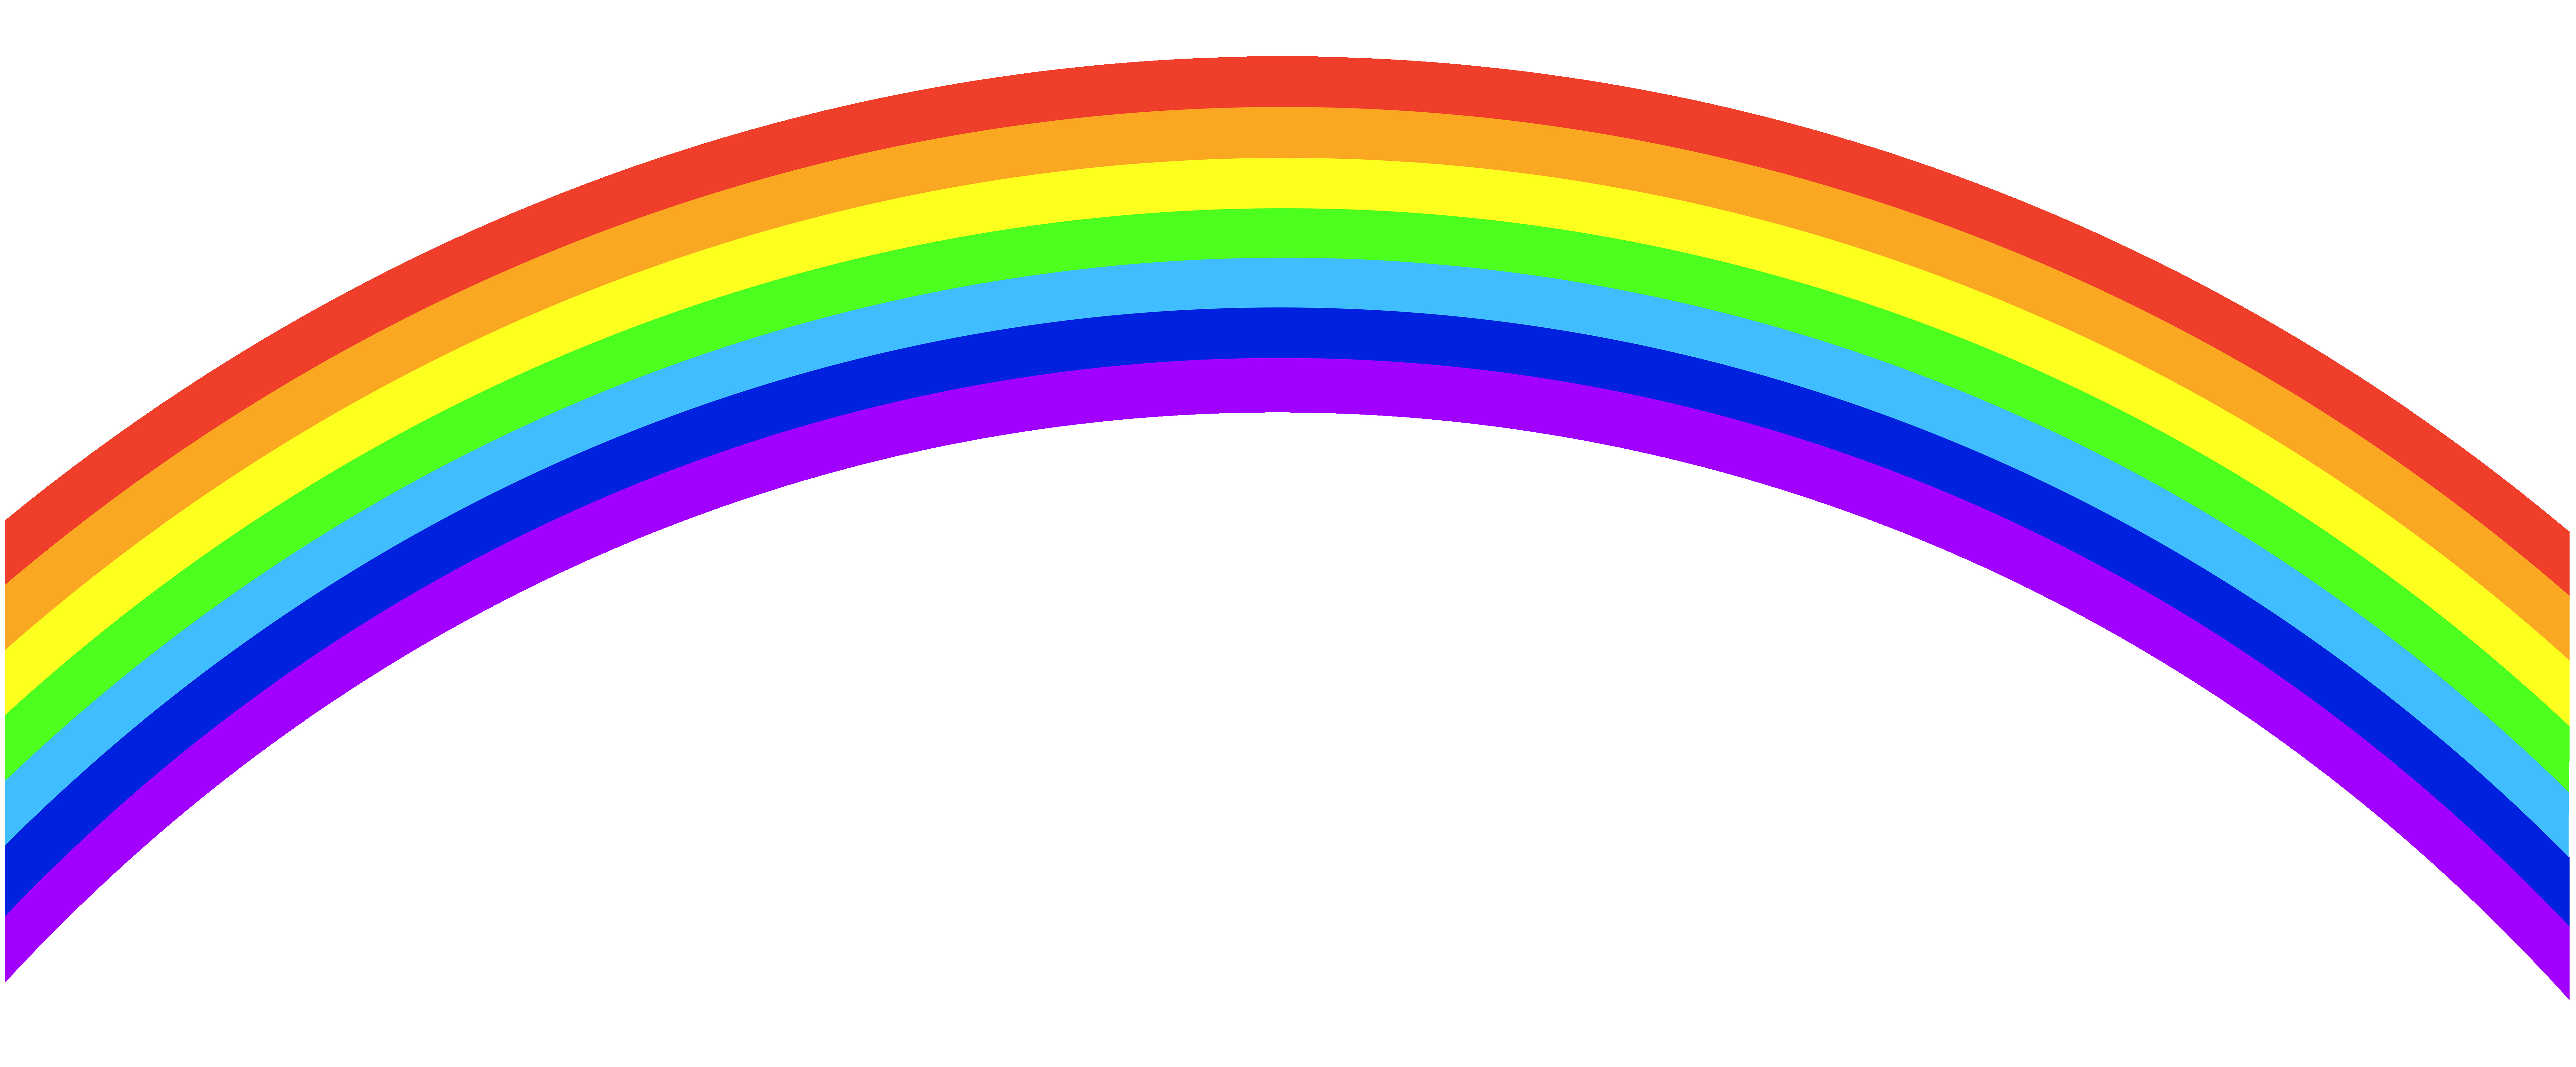 Free Rainbow Clipart at GetDrawings.com.